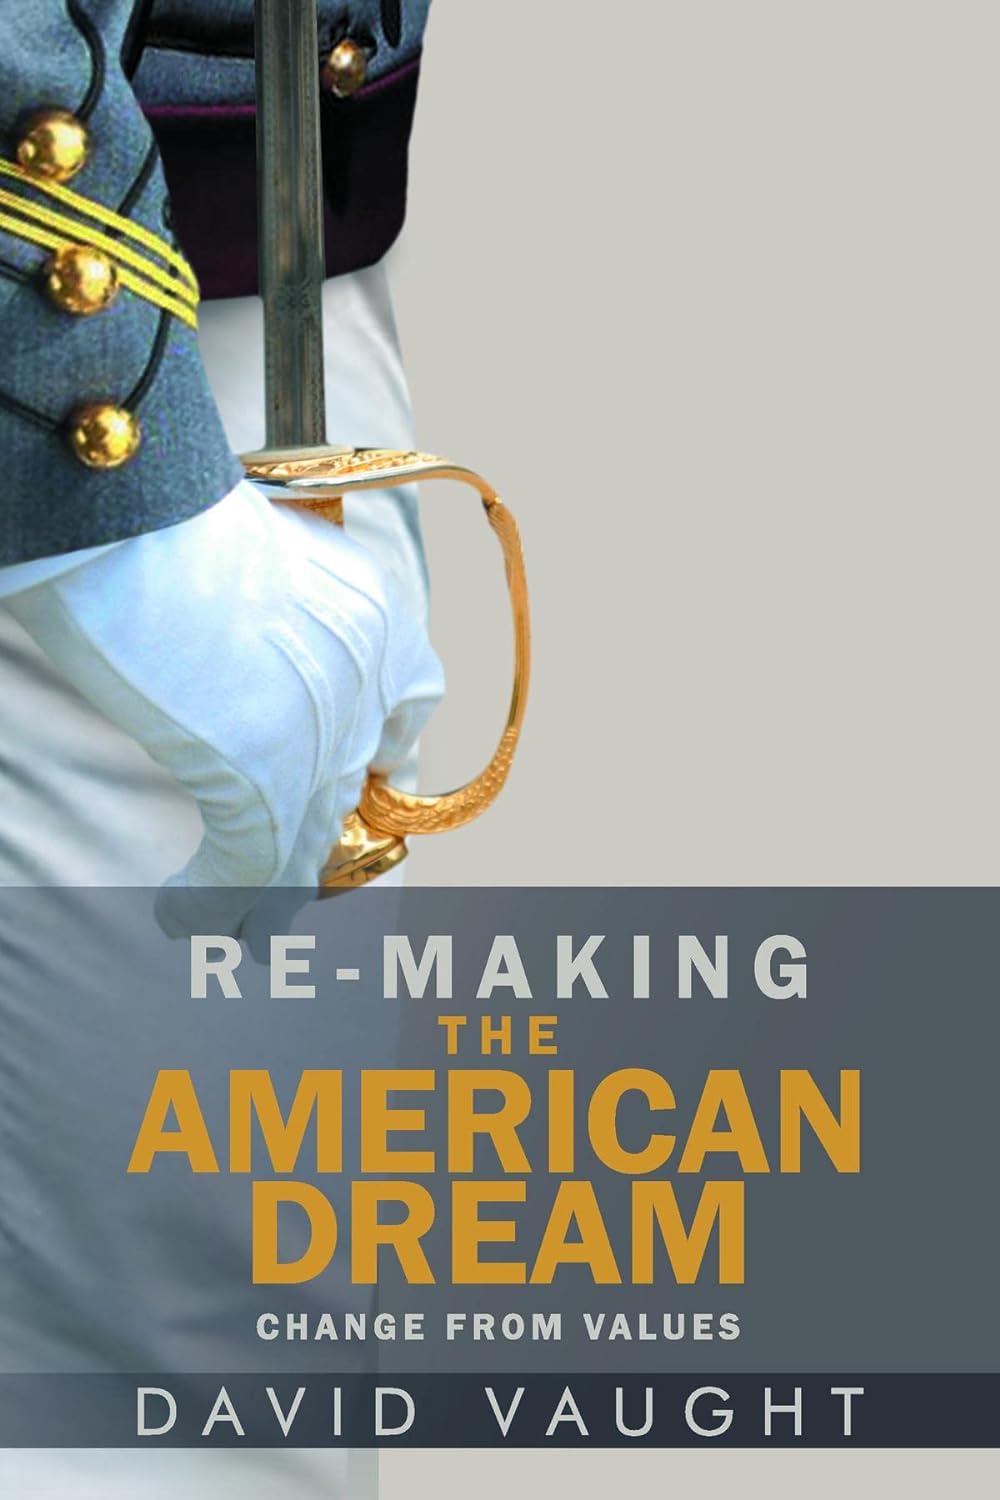 David Vaught talks about his new book ‘Re-Making the American Dream’ on The Zach Feldman Show